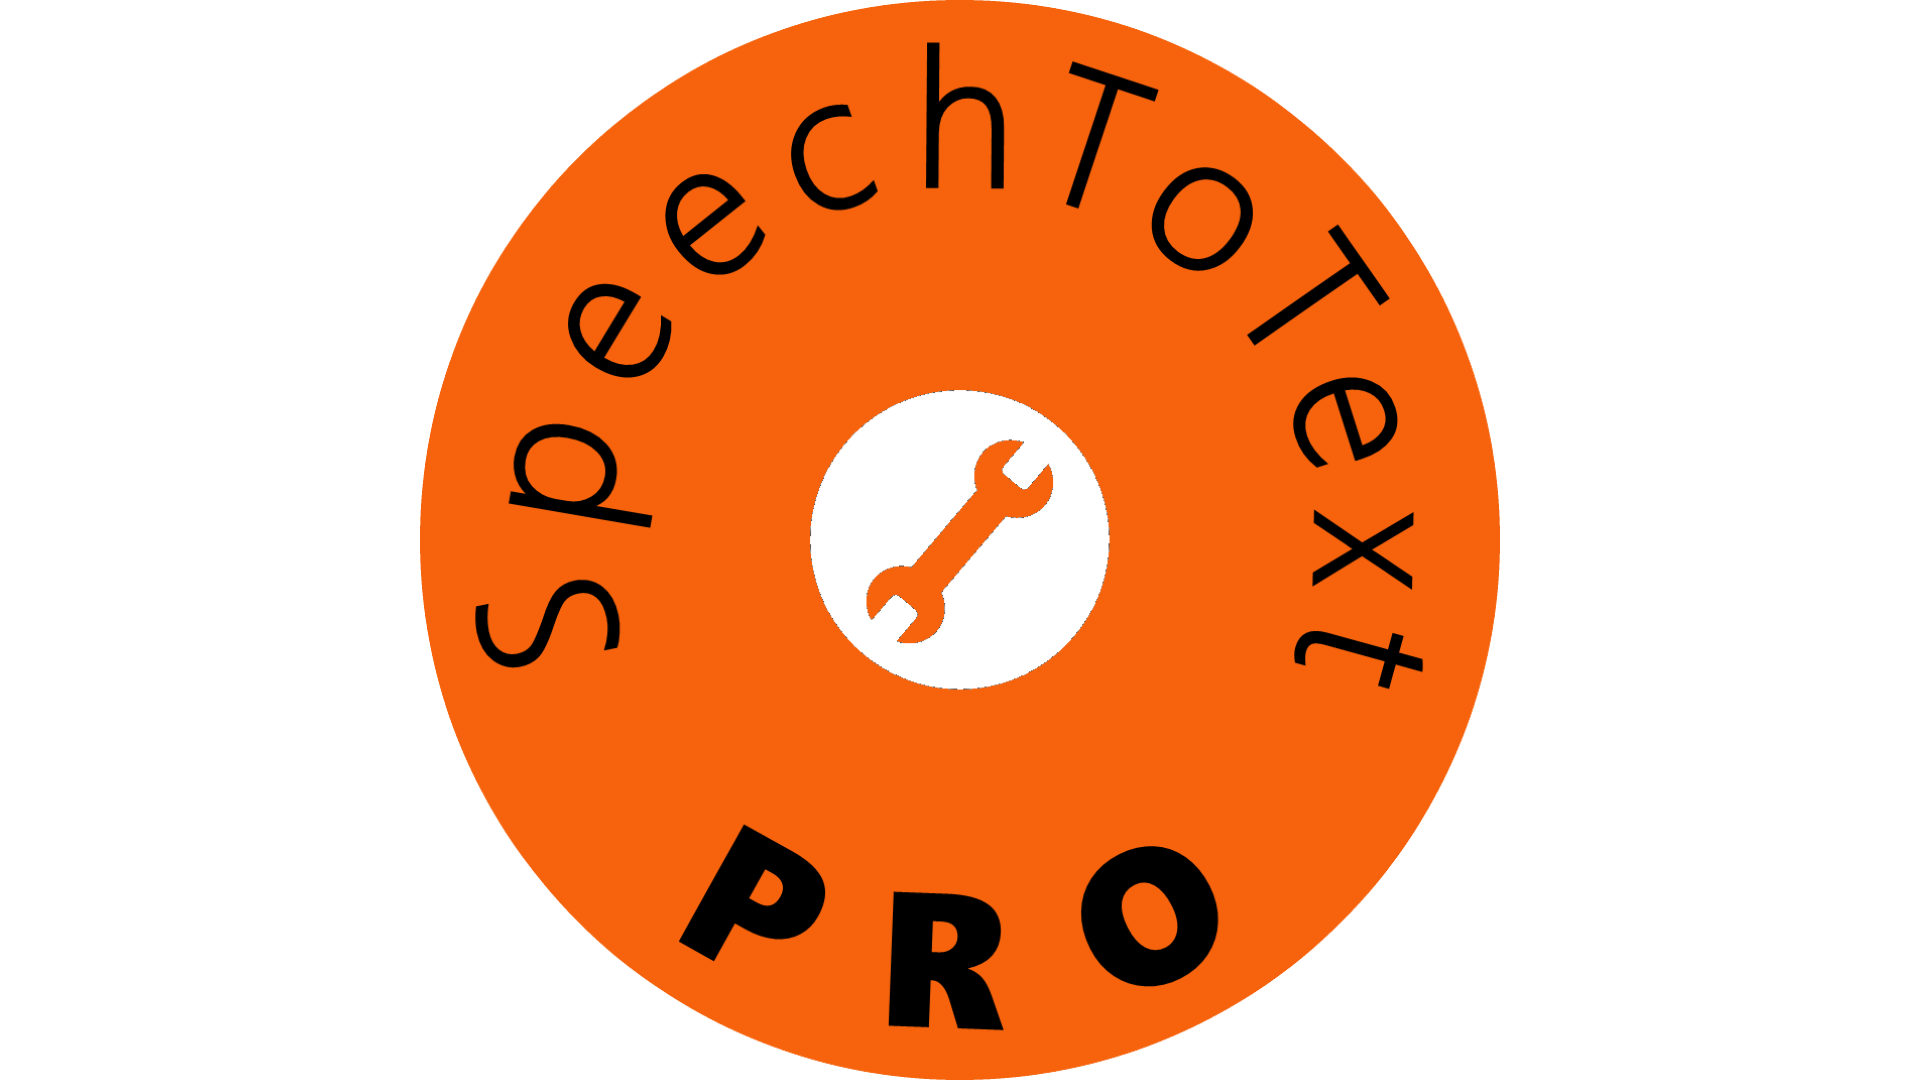  An orange circle with the words 'Speech to Text Pro' written inside in a black circle in the center and 'Speech to Text' written inside the outer circle.